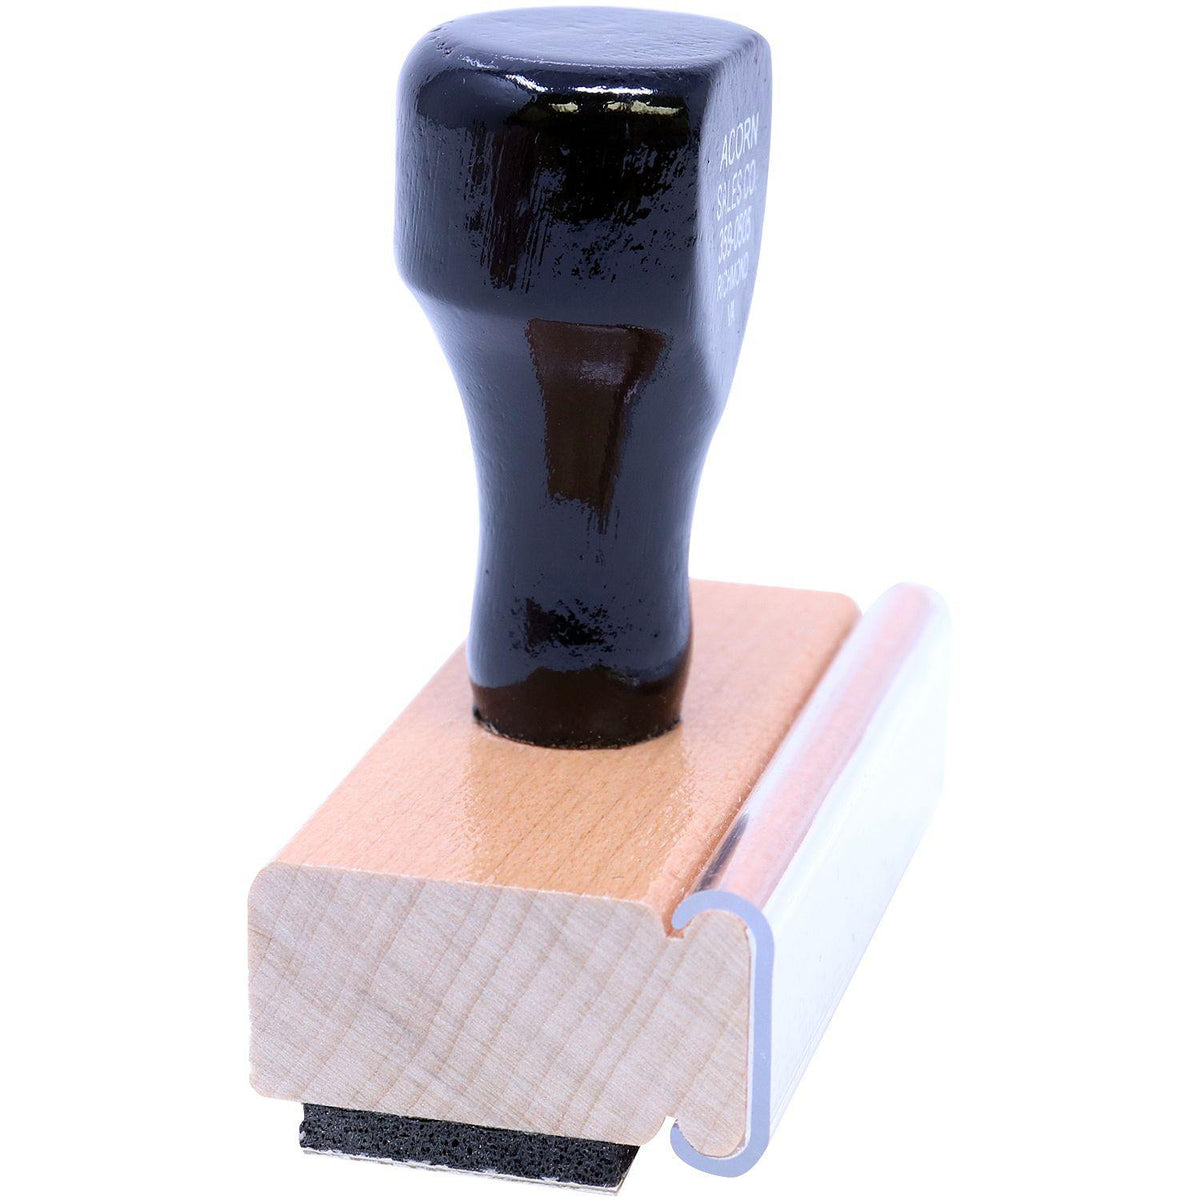 Side View of Large Draft Rubber Stamp at an Angle